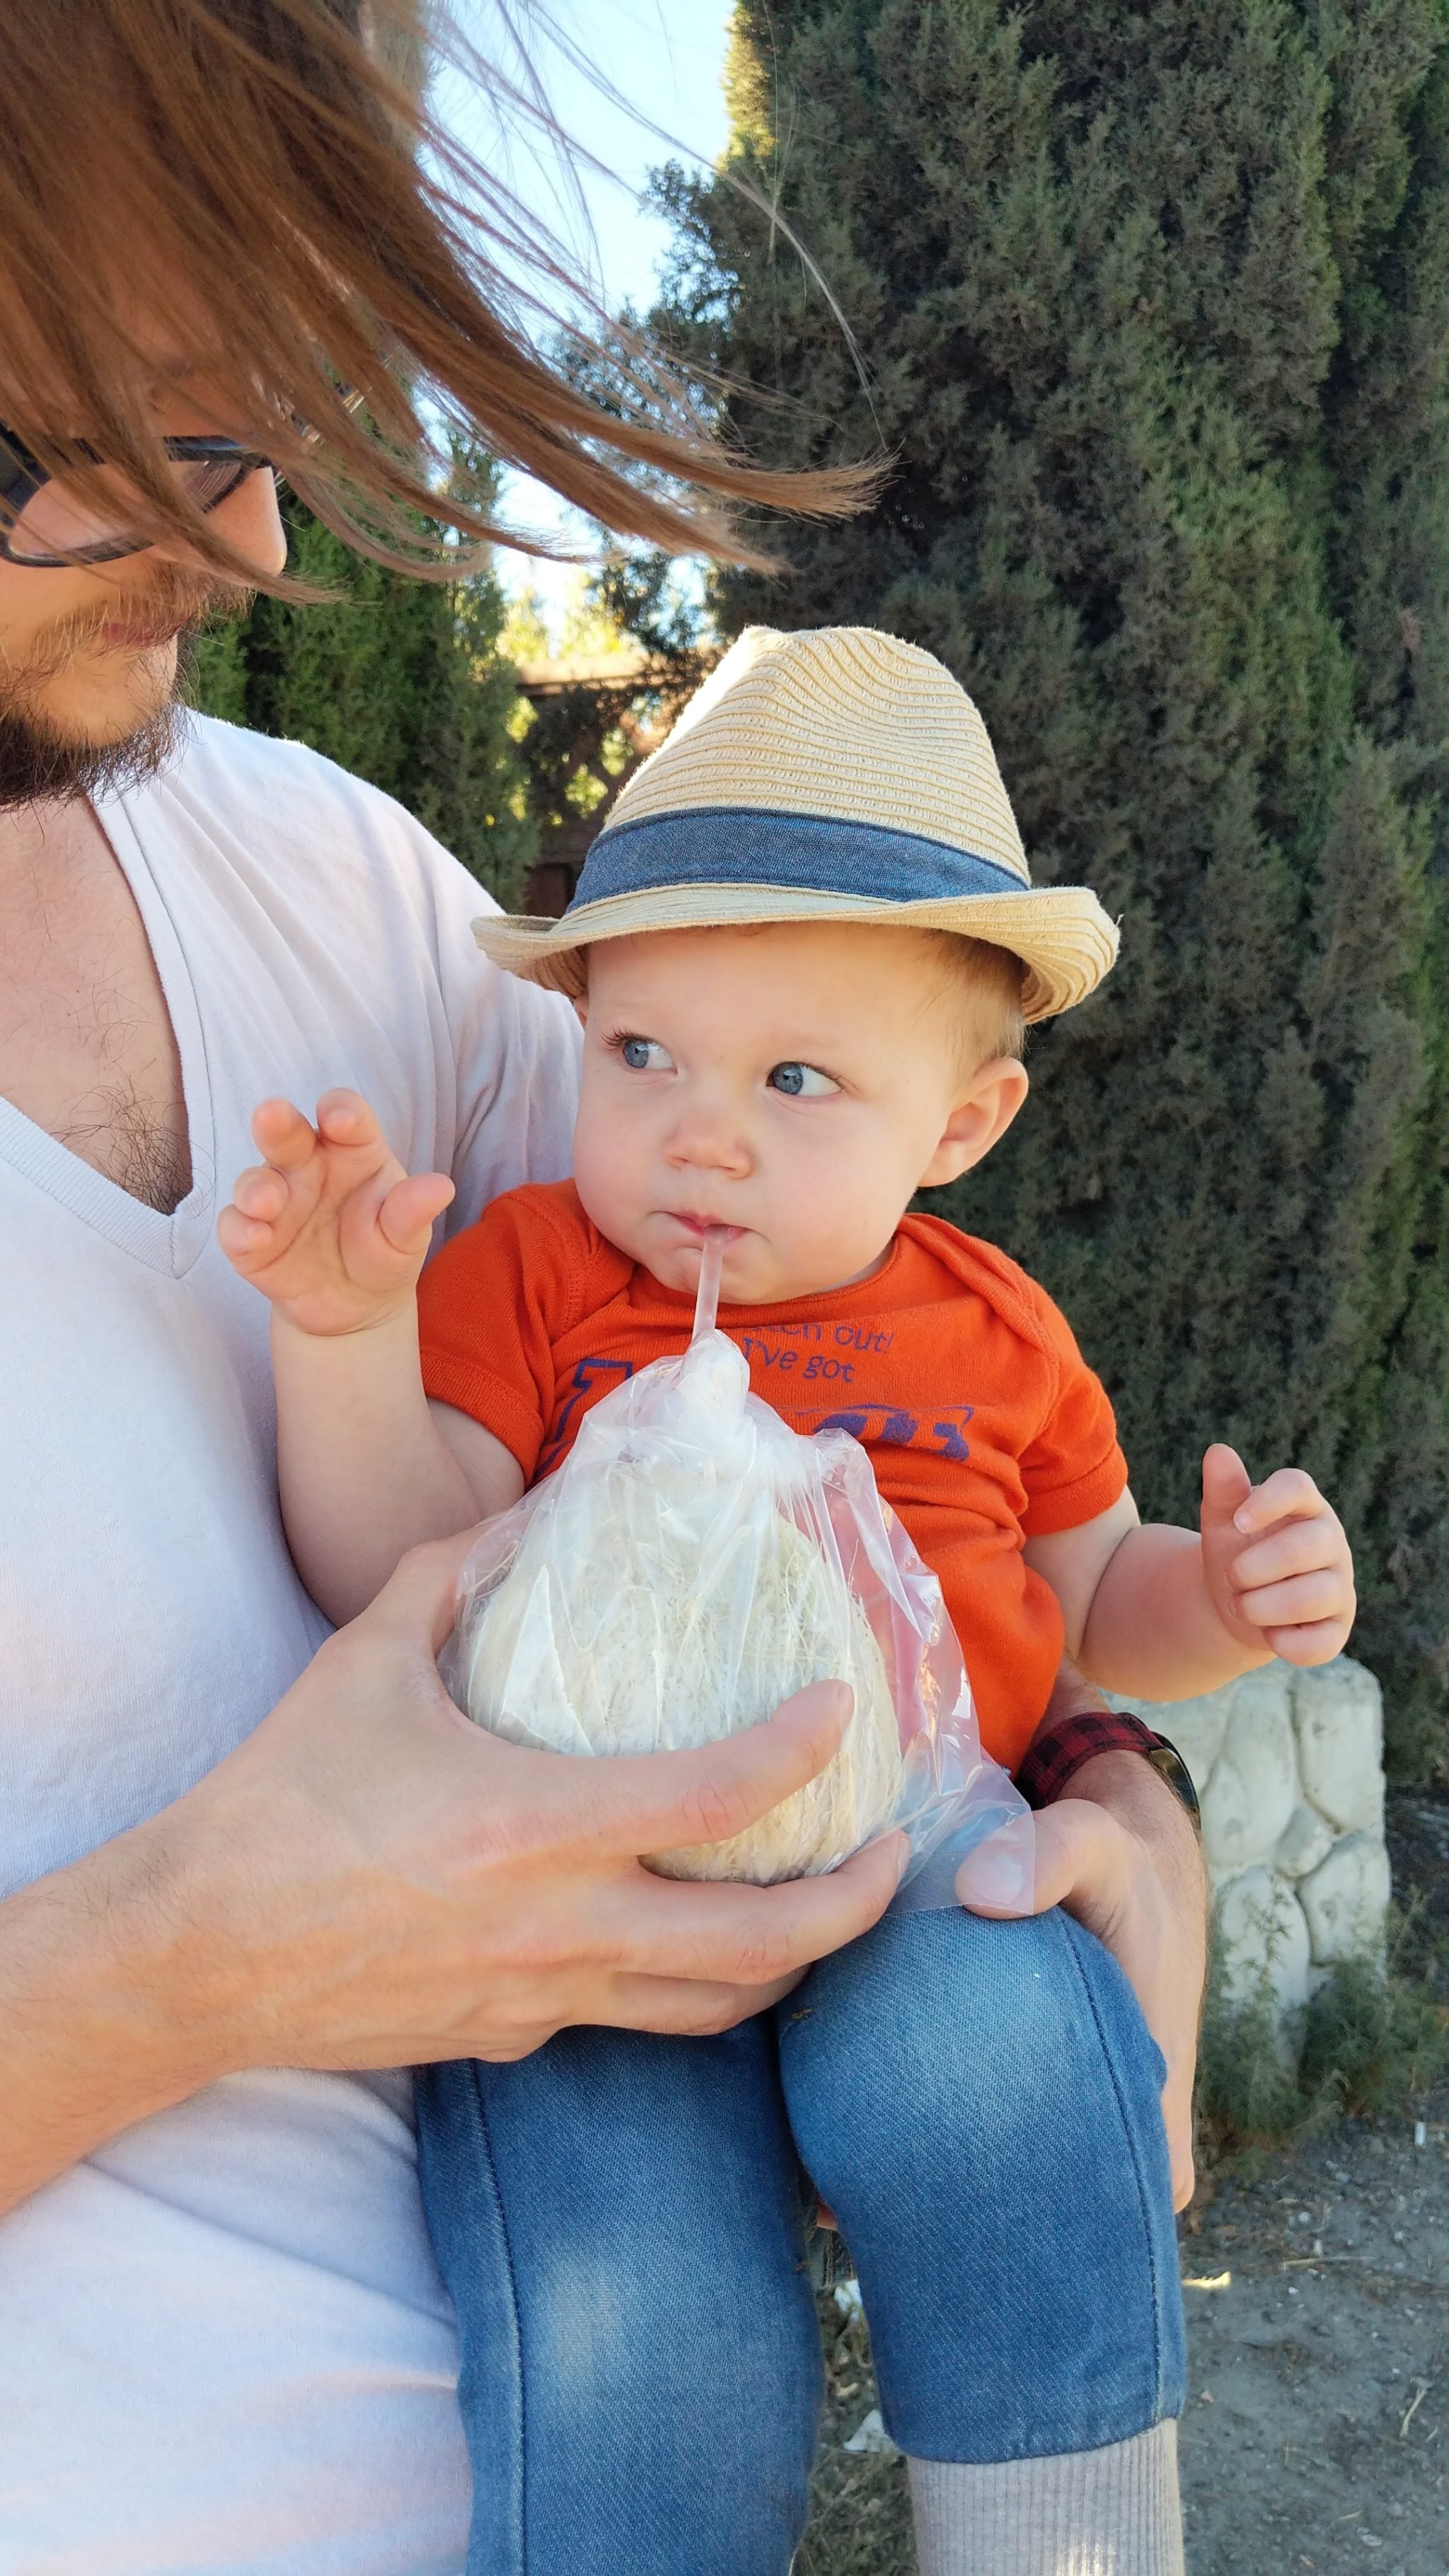 A man holds a baby as the baby drinks from a straw